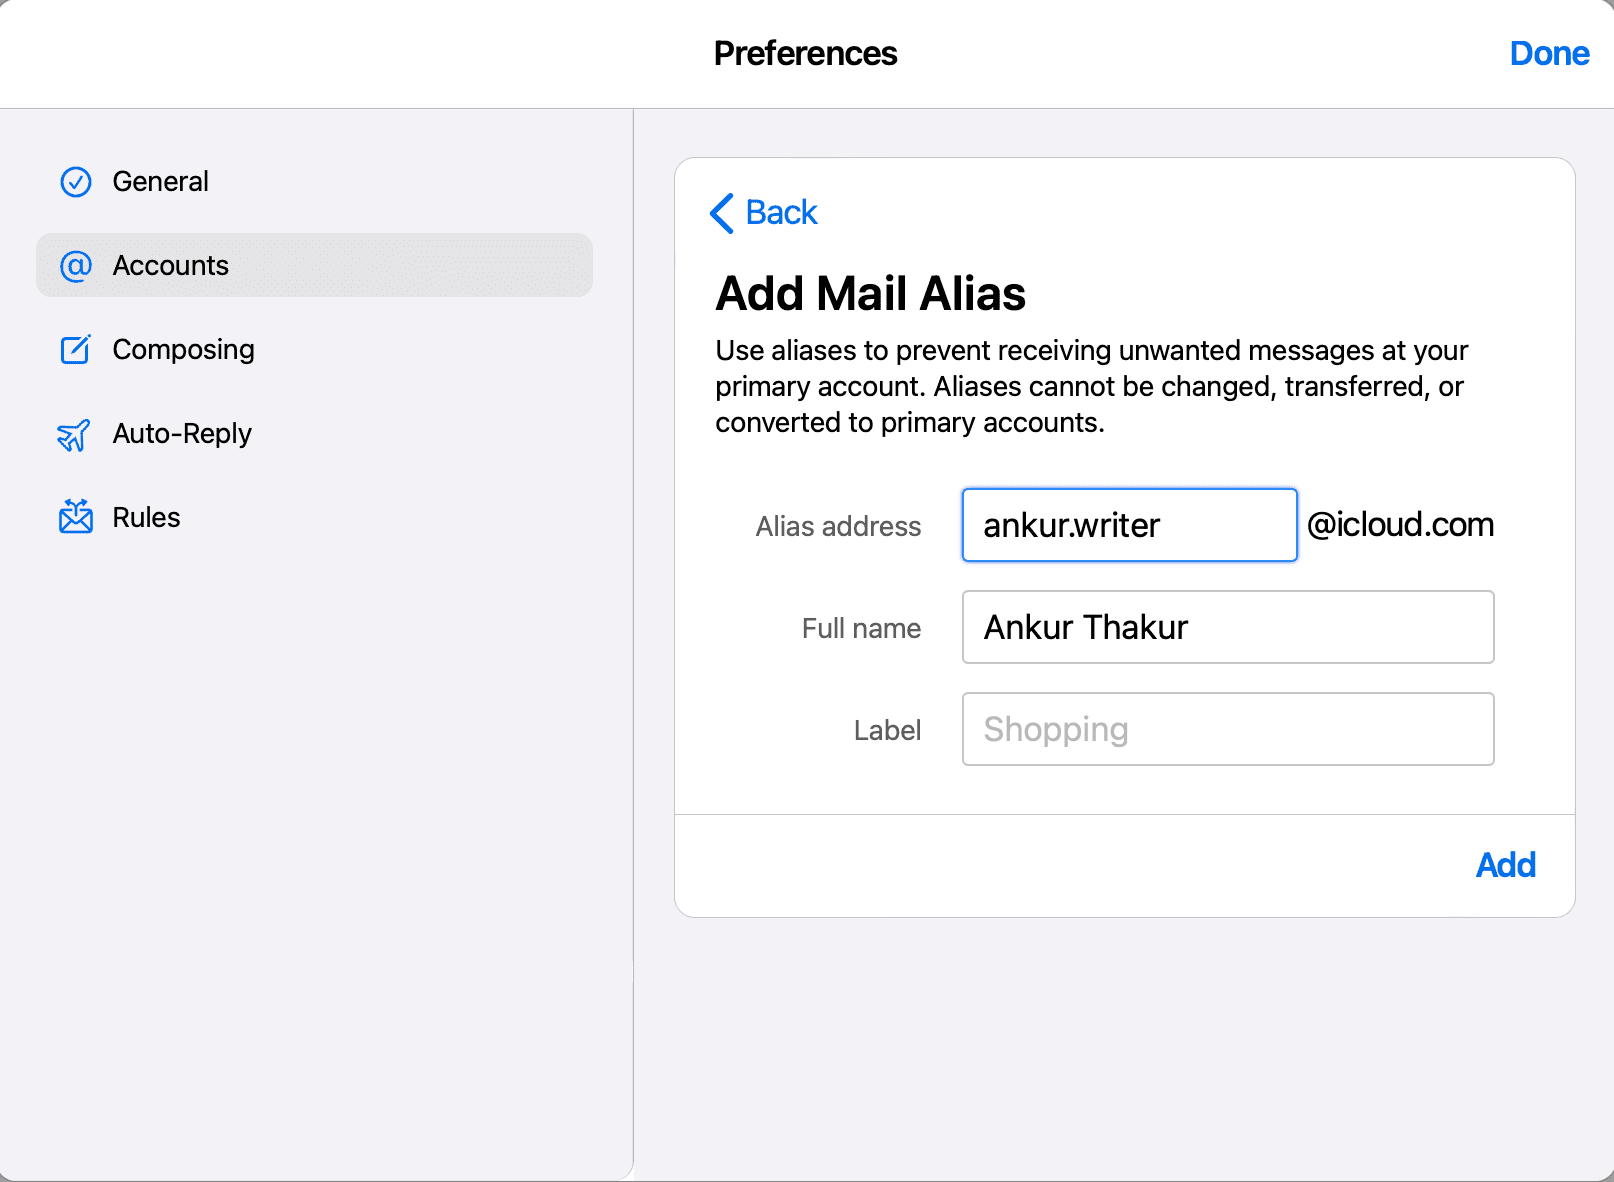 How to Use iCloud Email Address Aliases